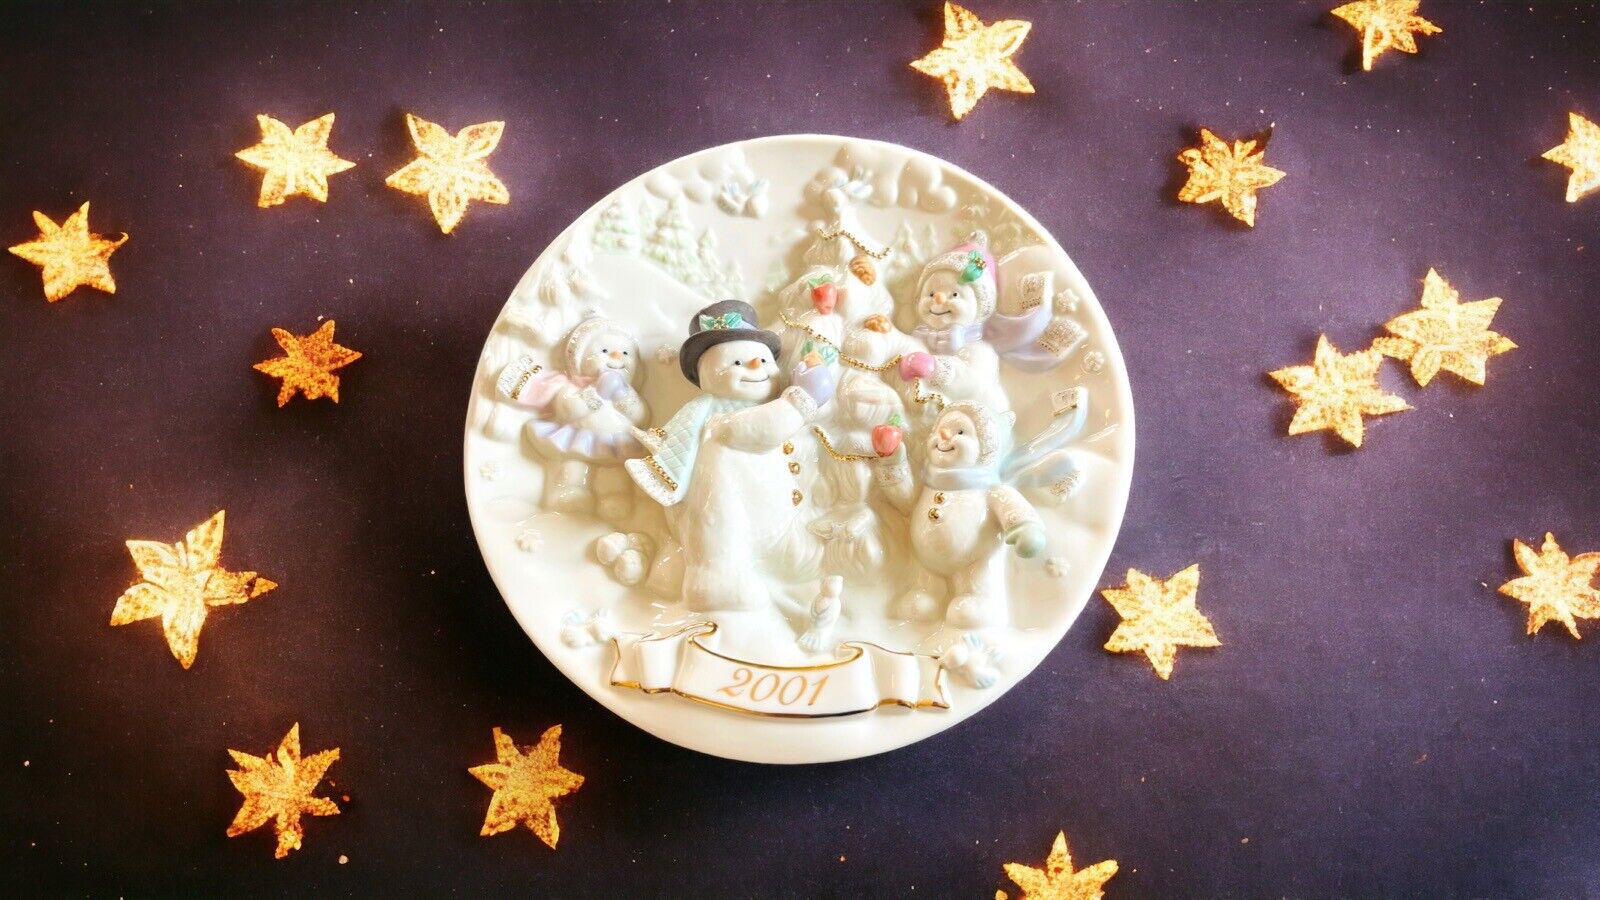 Lenox Snowman Collection Vintage 2001 Collectors Plate  Trimming The Tree